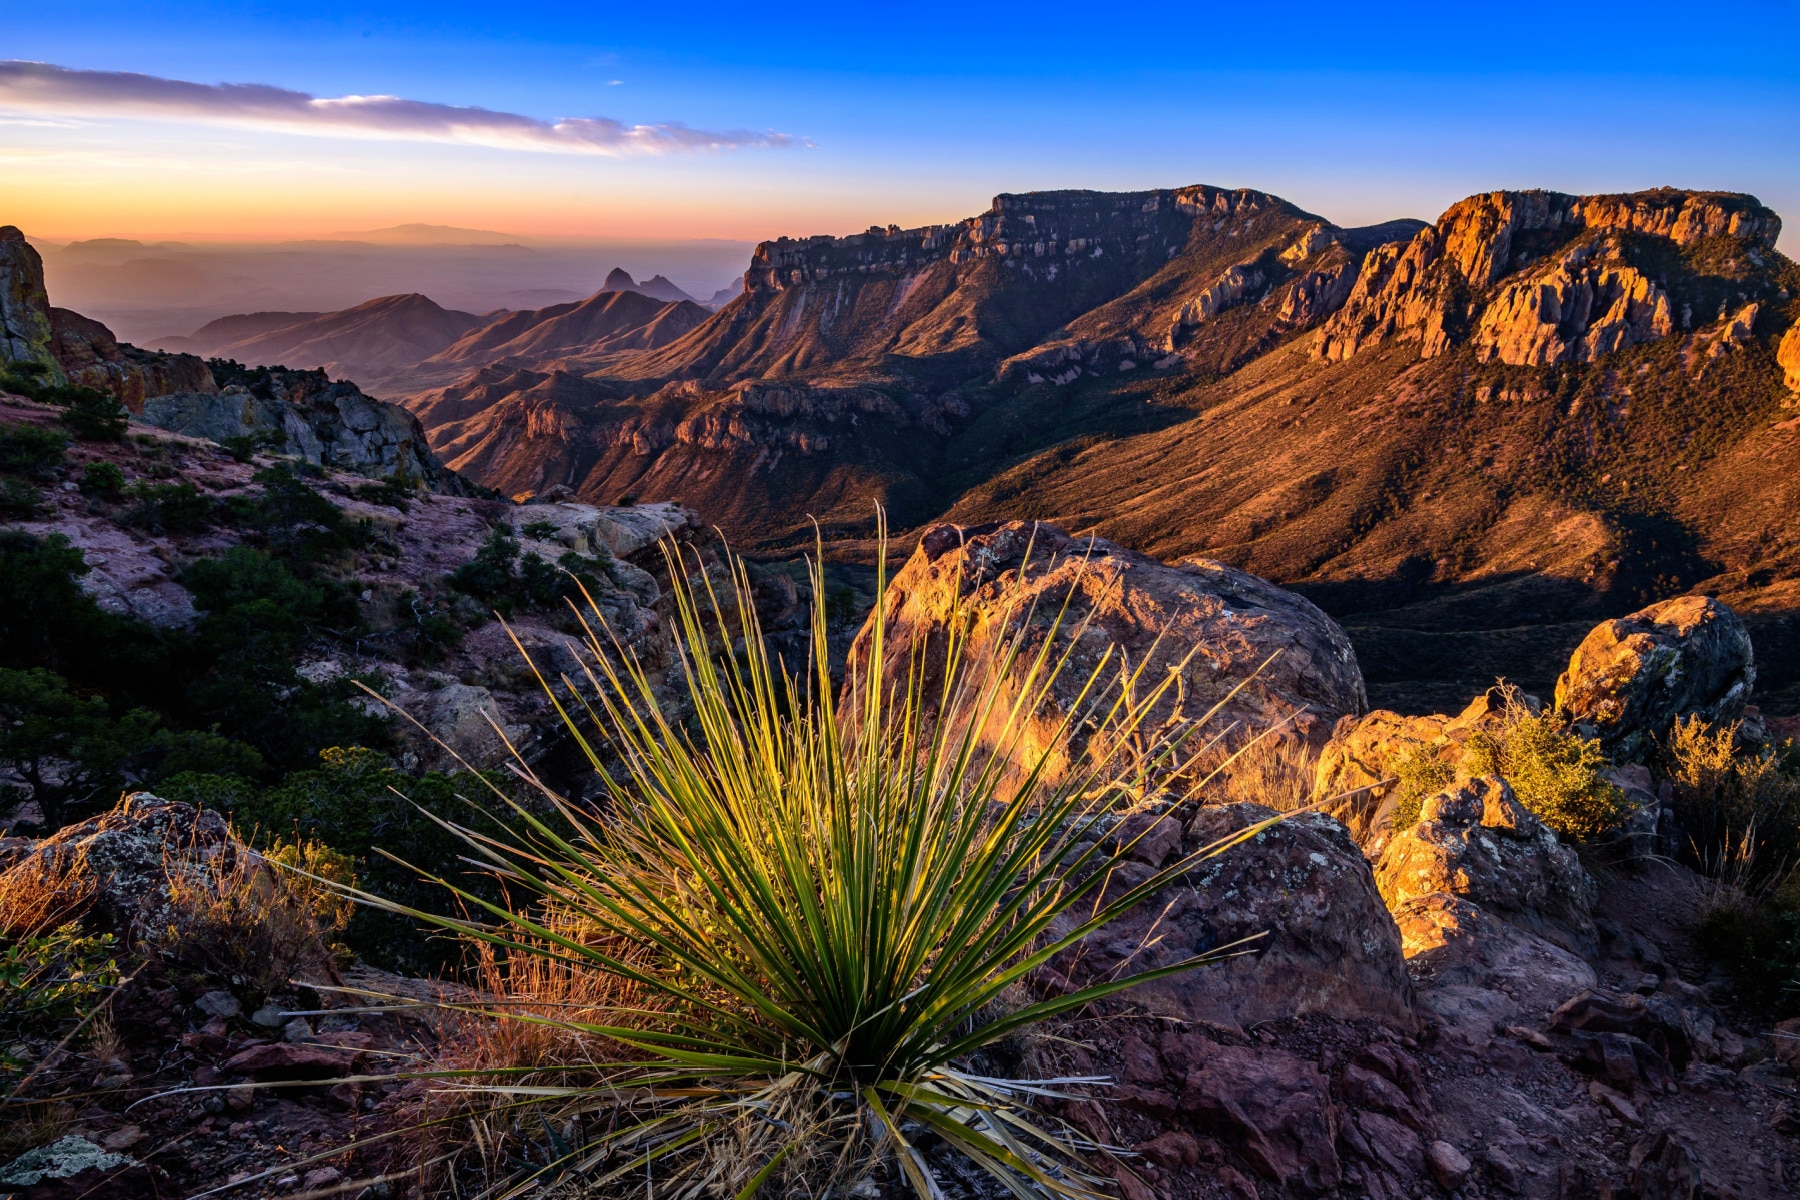 Desert flowers stand out among a sunset view of mountains at Big Bend National Park. 